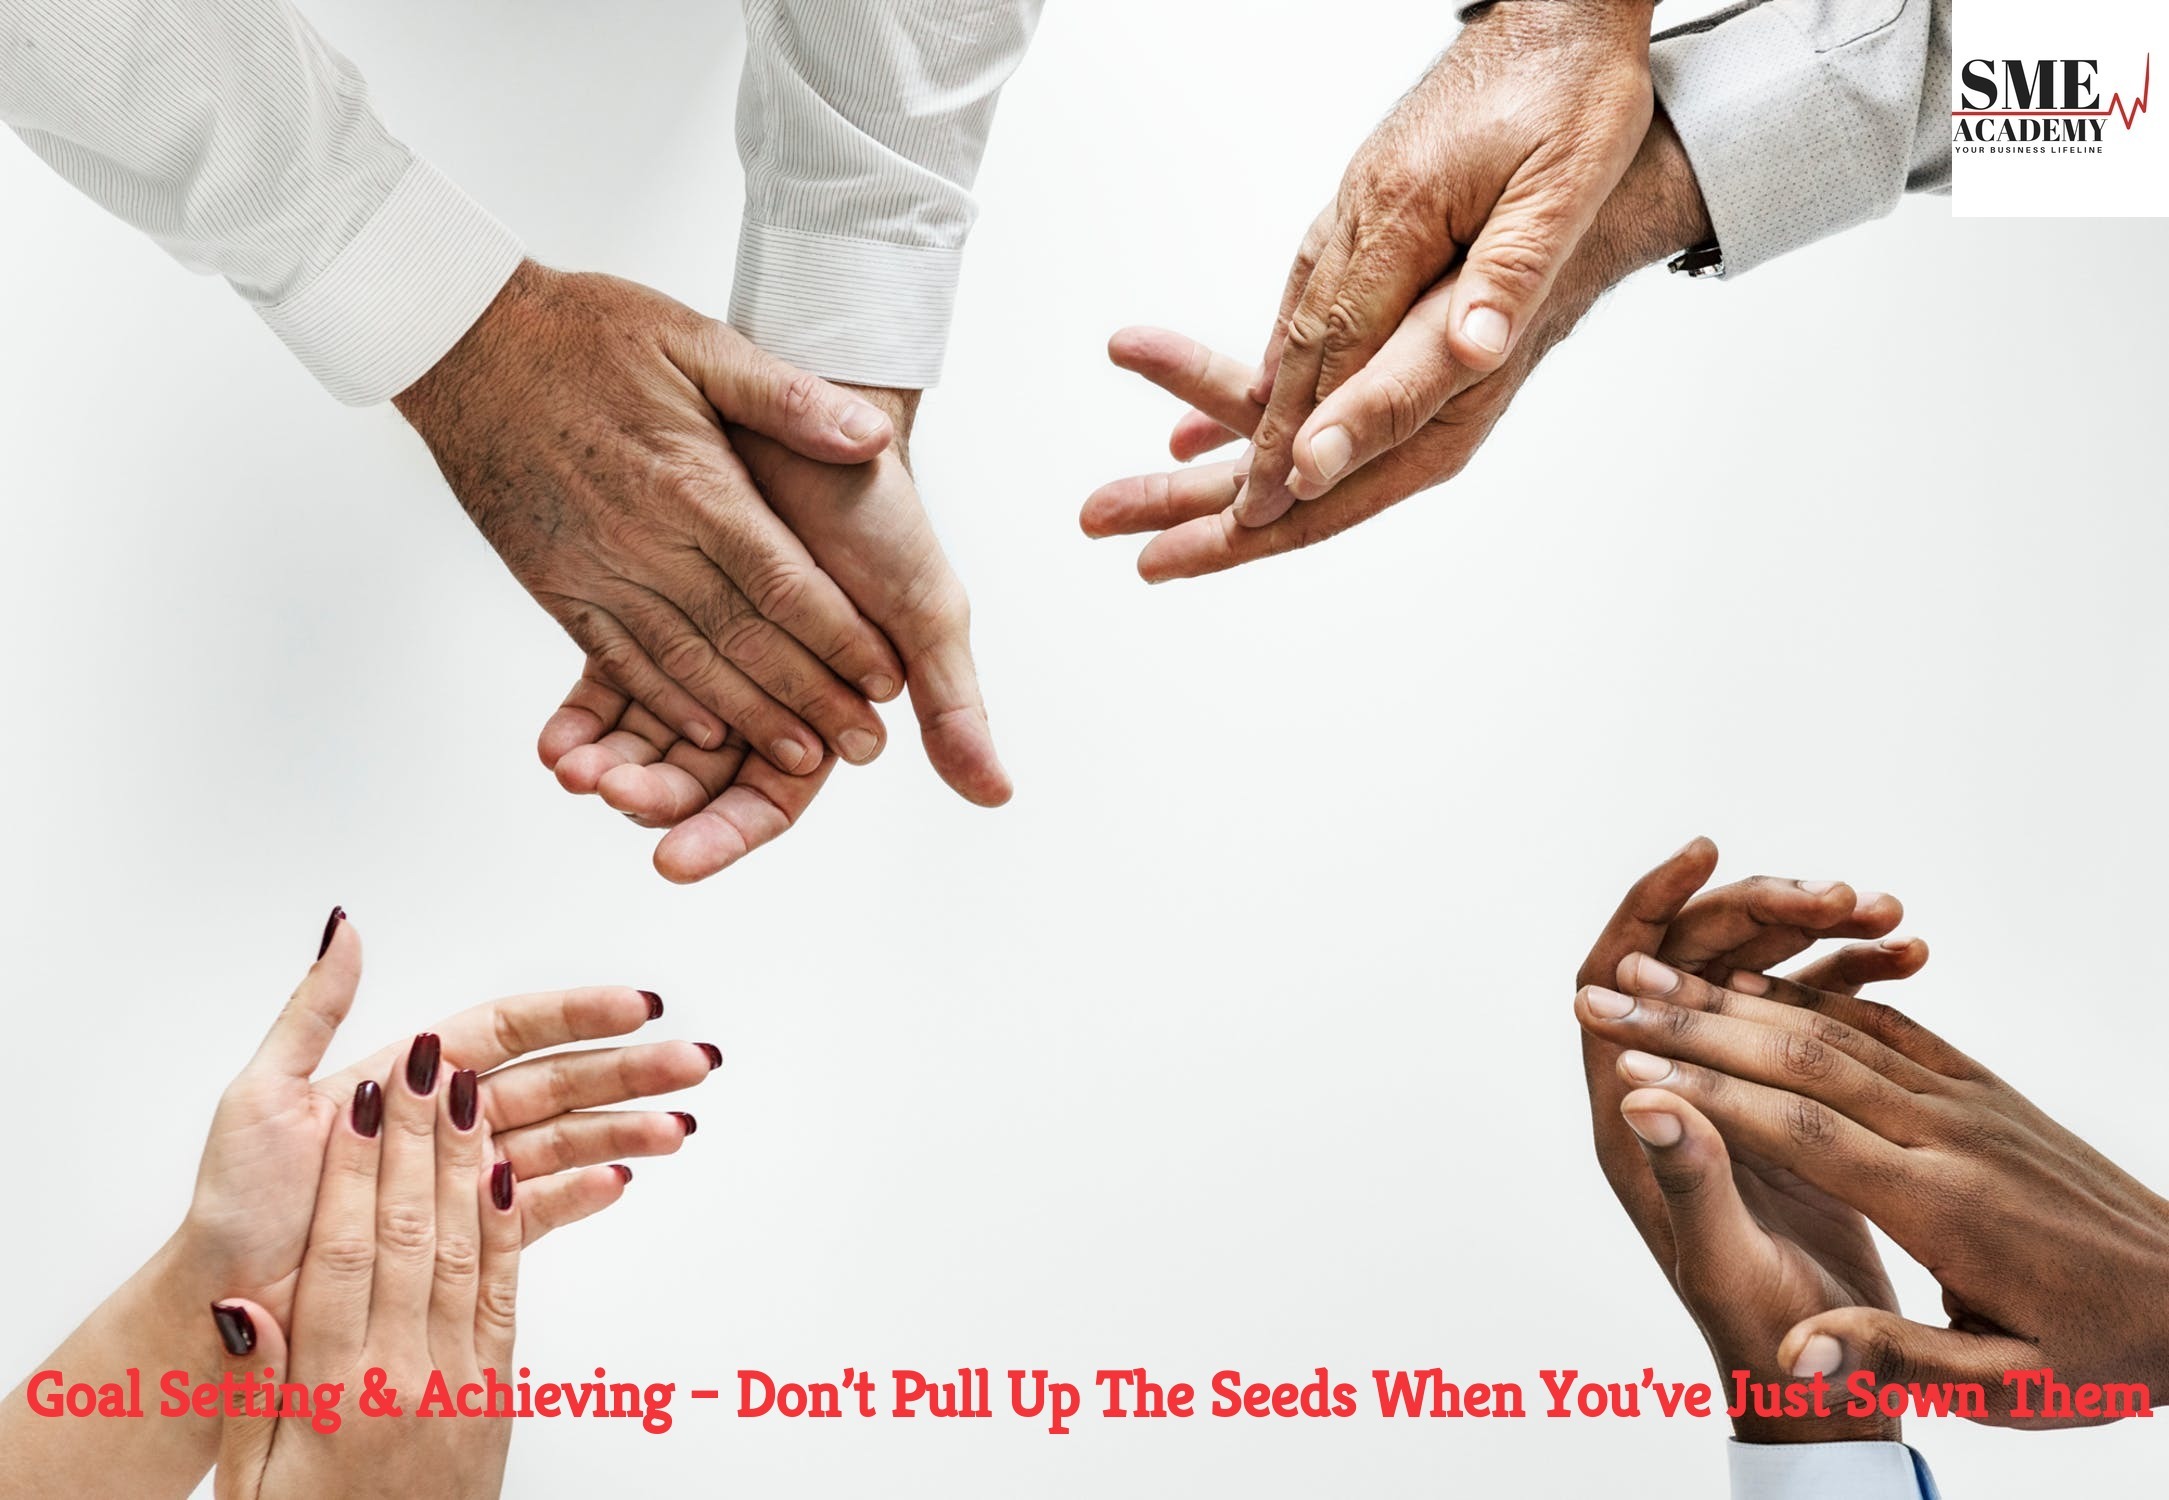 Goal Setting & Achieving – Don’t Pull Up The Seeds When You’ve Just Sown Them